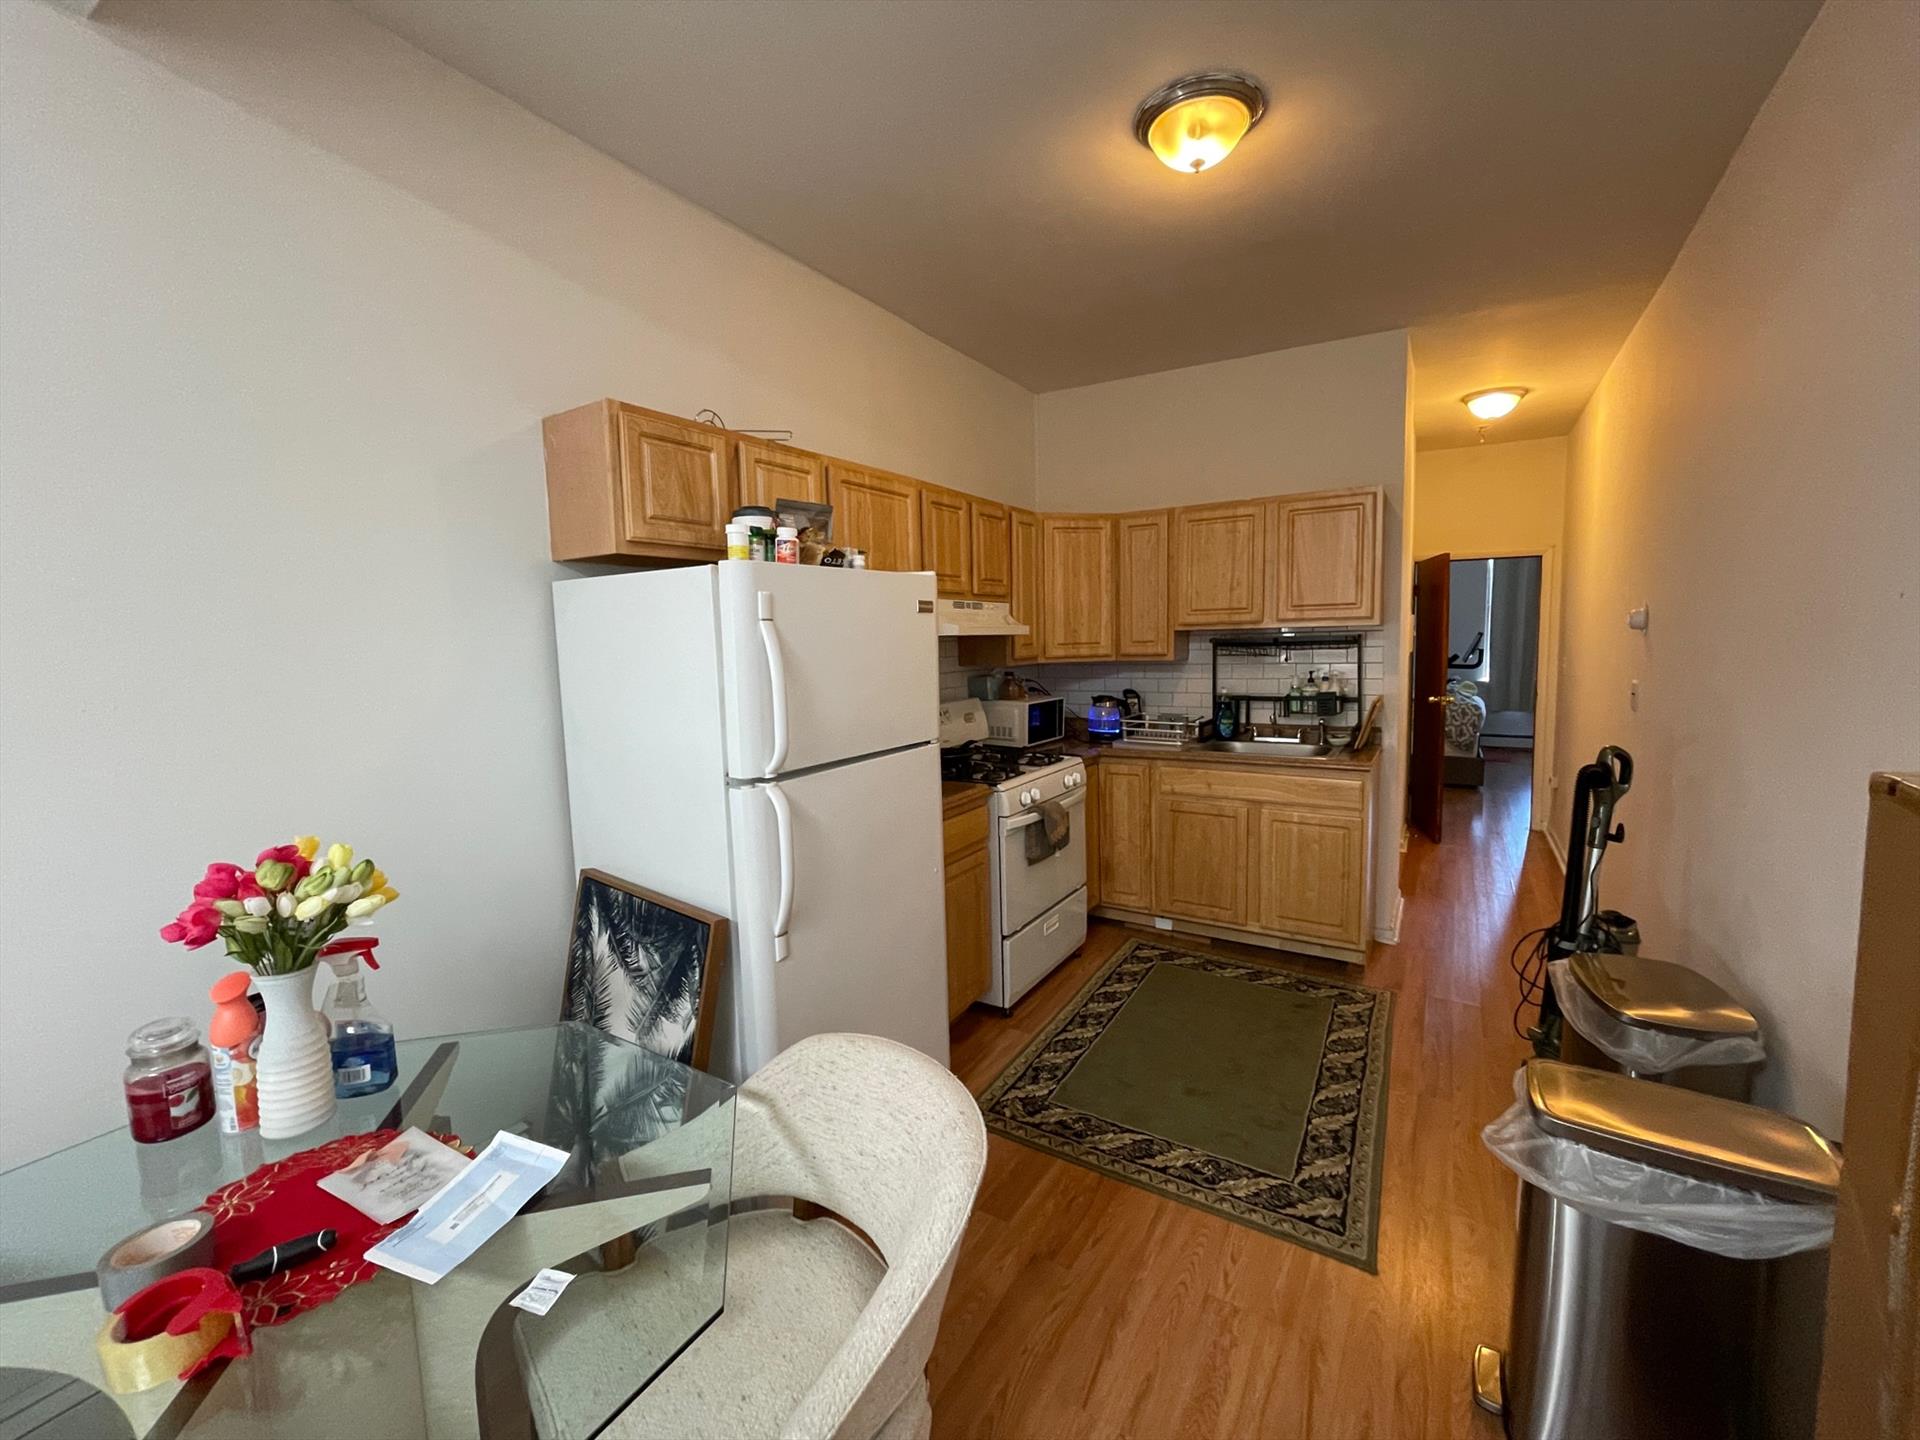 Fantastic 1 bedroom + den in the heart of Hoboken. Apartment features hardwood floors, efficient open layout and a great location! Don't miss out on this fantastic unit. Available ASAP. Broker fee is 10% of annual rent. 